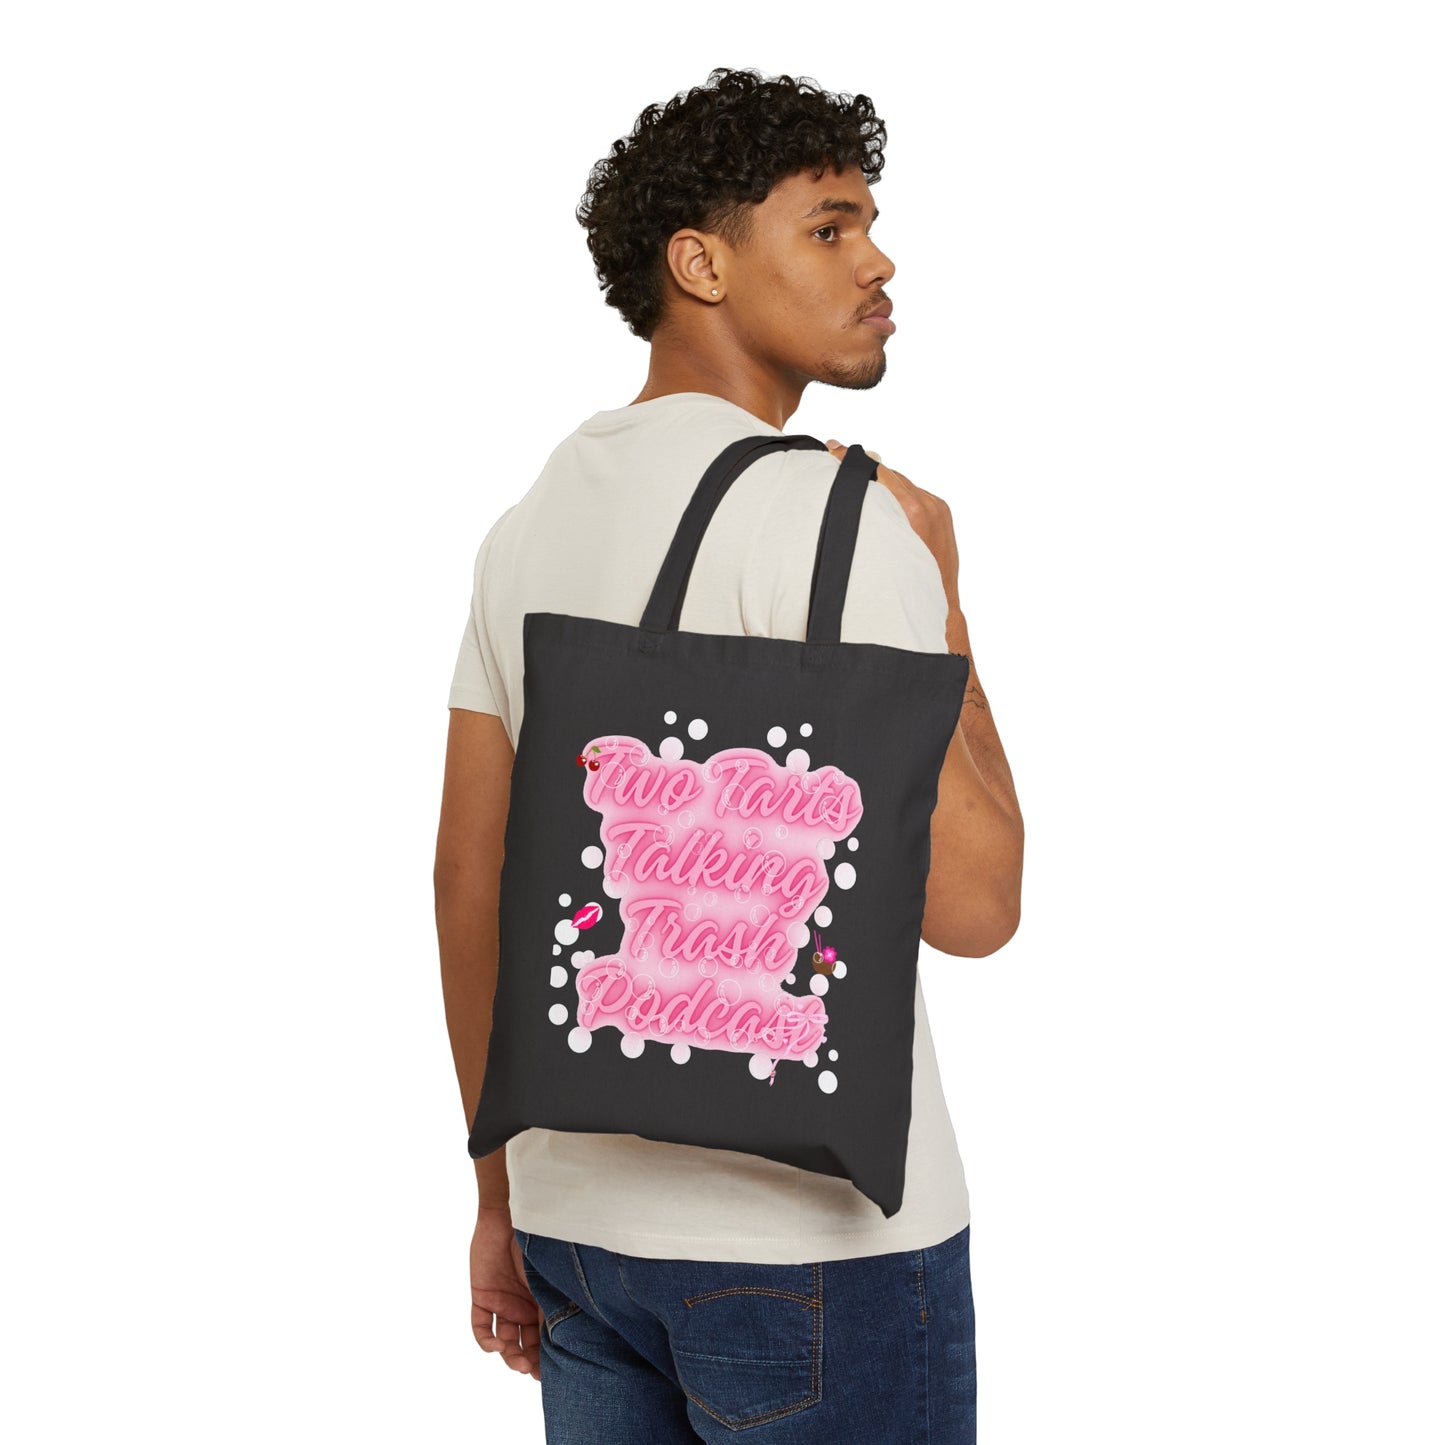 Two Tarts Talking Trash Podcast Ping Bubble Cotton Canvas Tote Bag